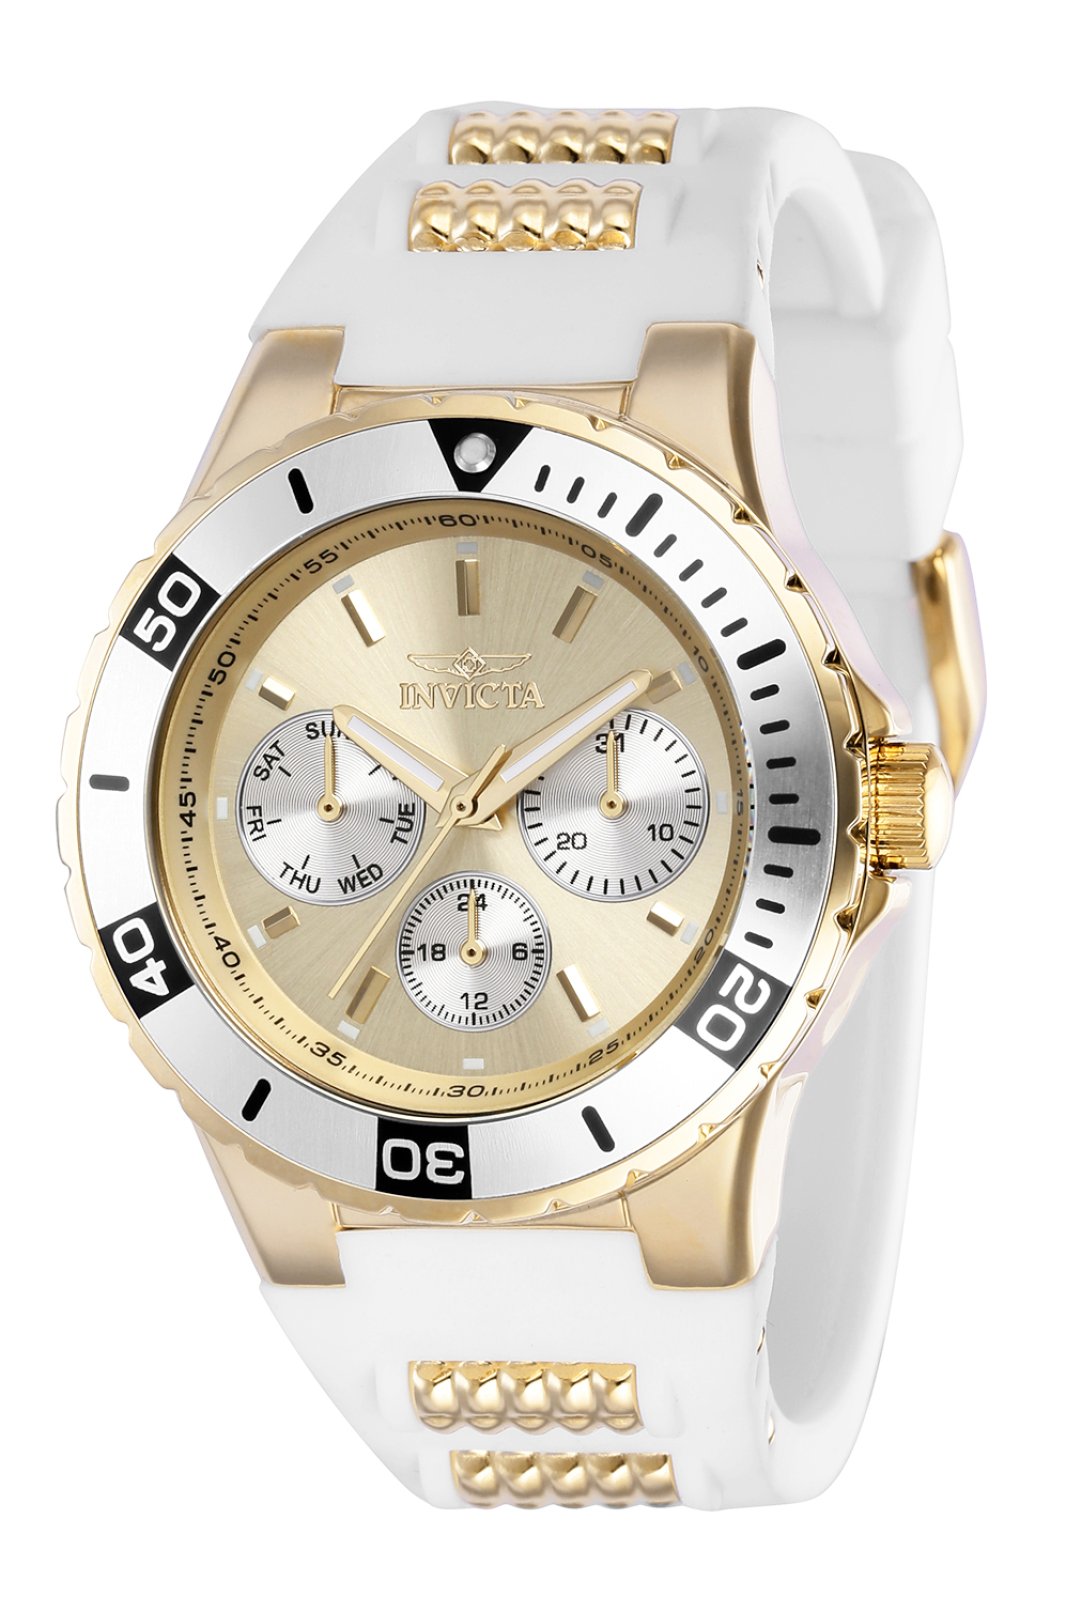 Invicta Watch Aviator 37317 - Official Invicta Store - Buy Online!